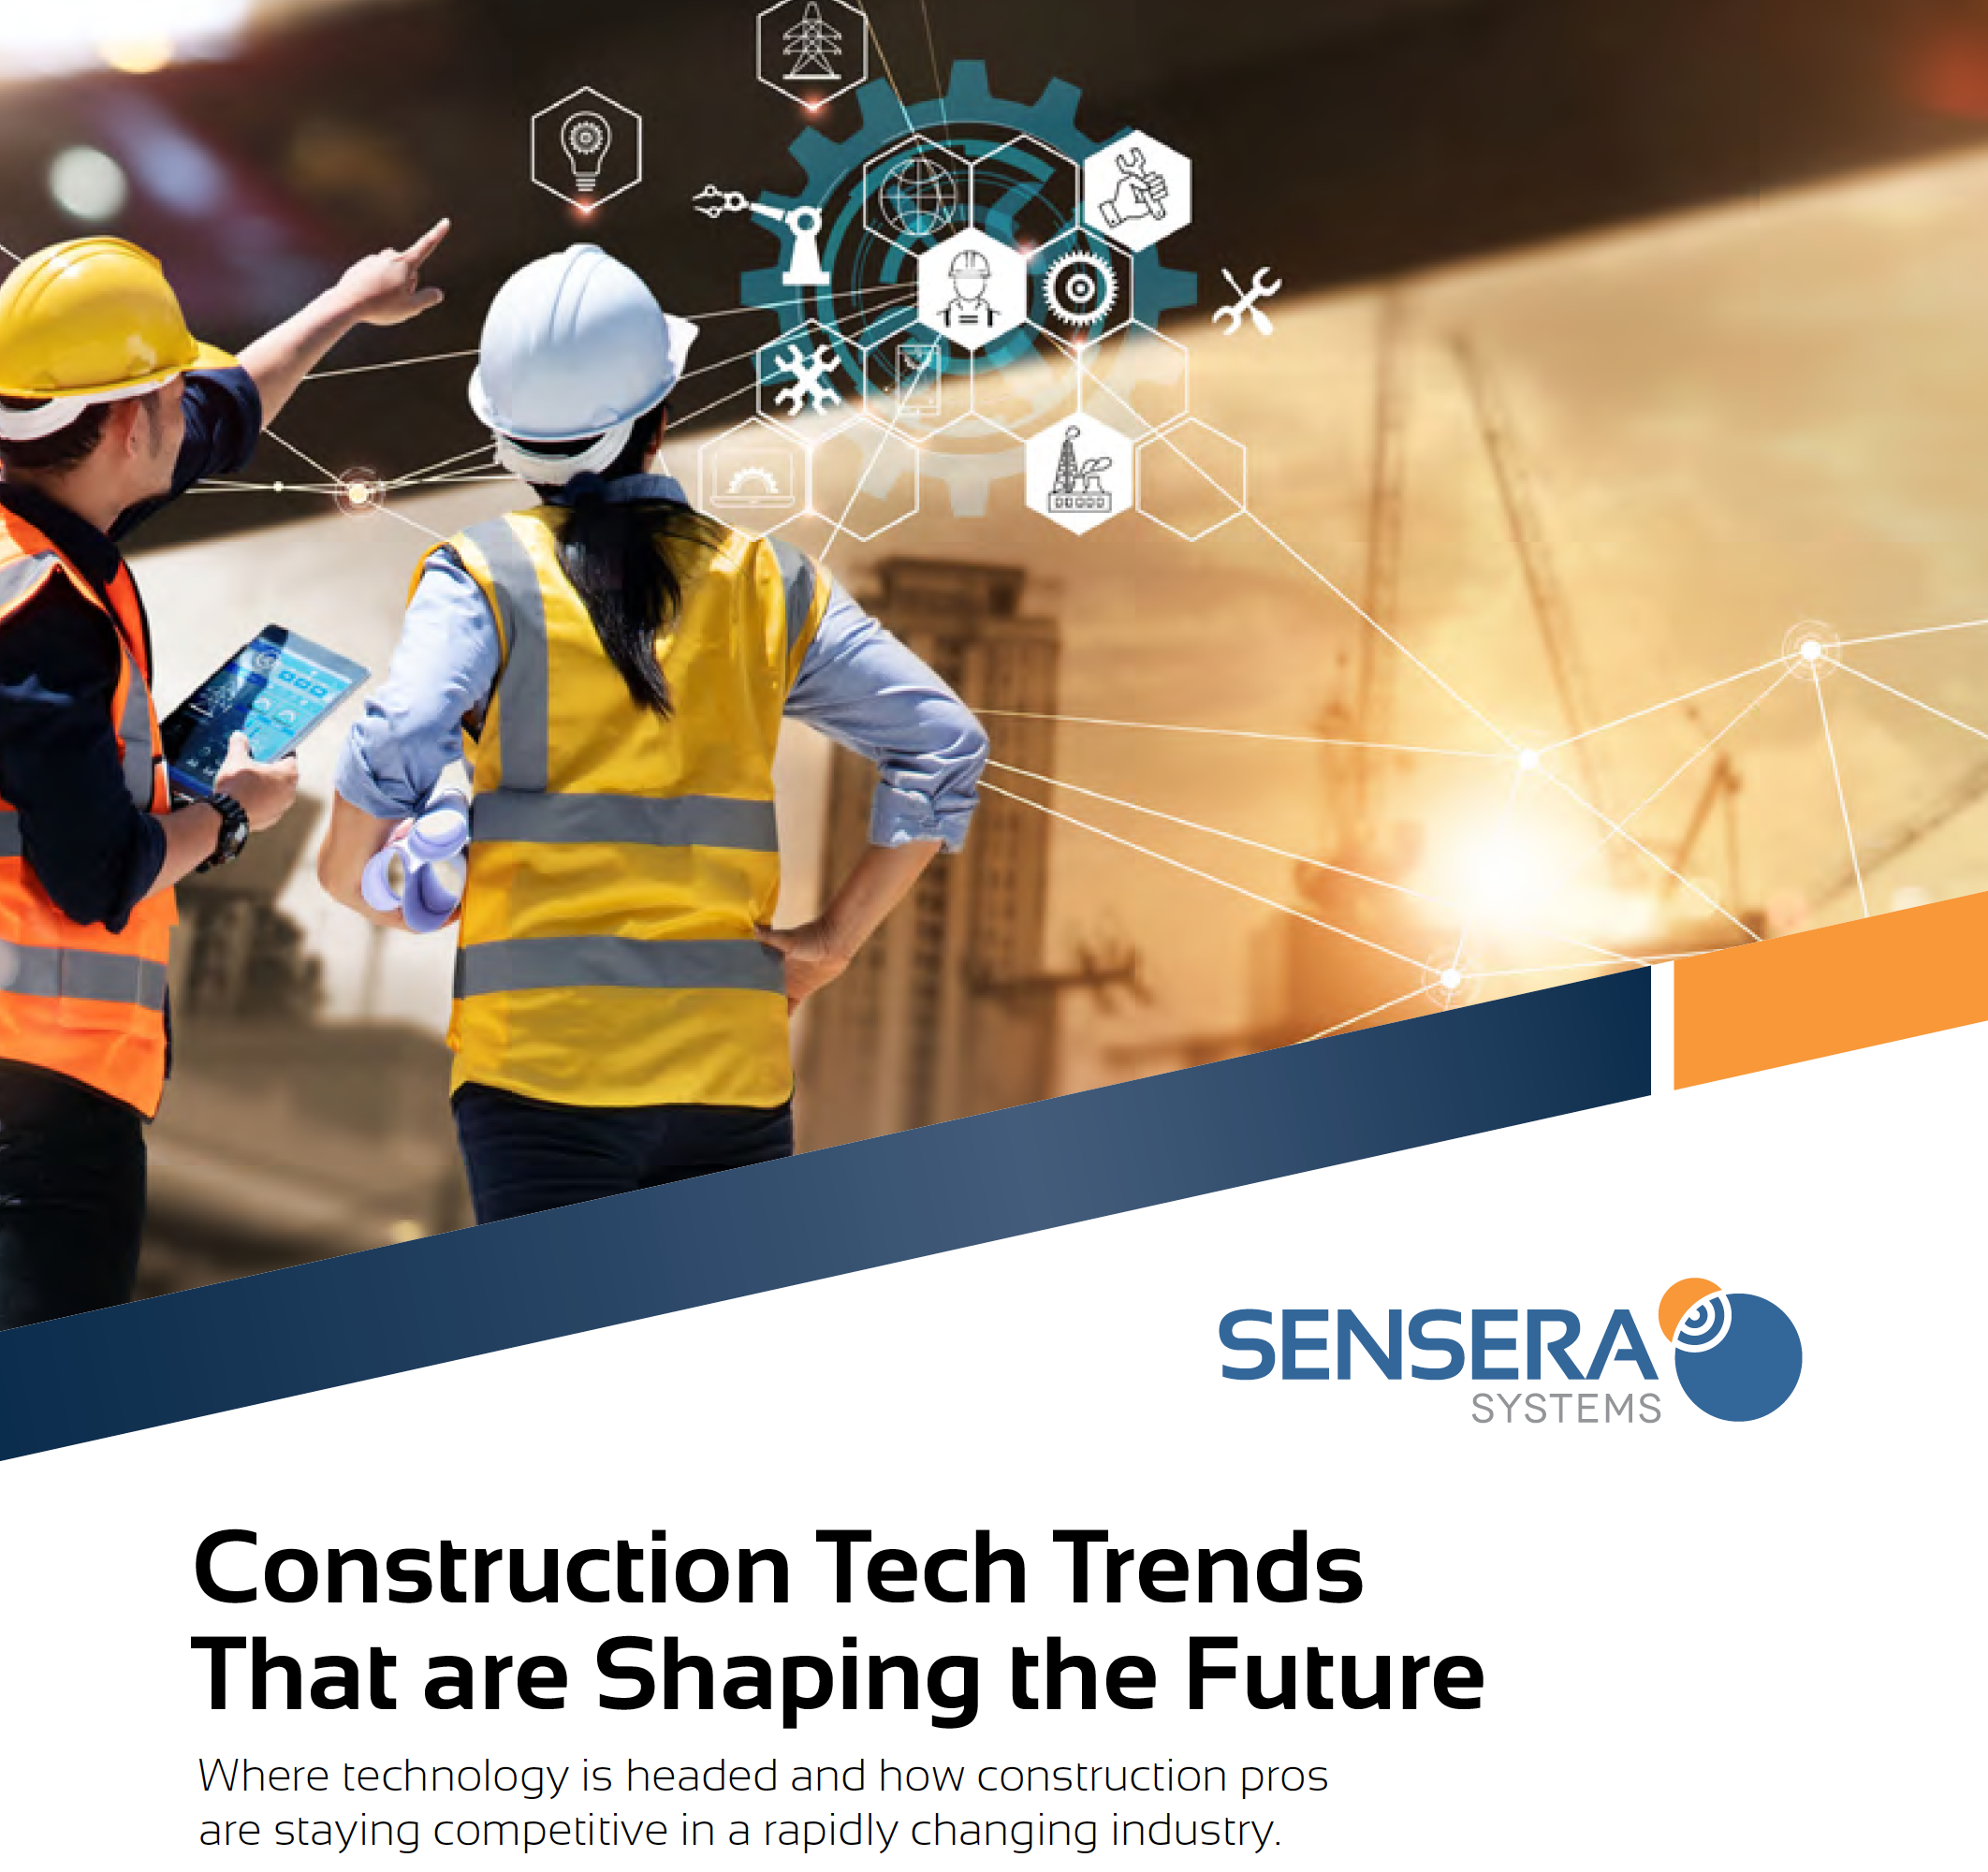 Construction Tech Trends That are Shaping the Future